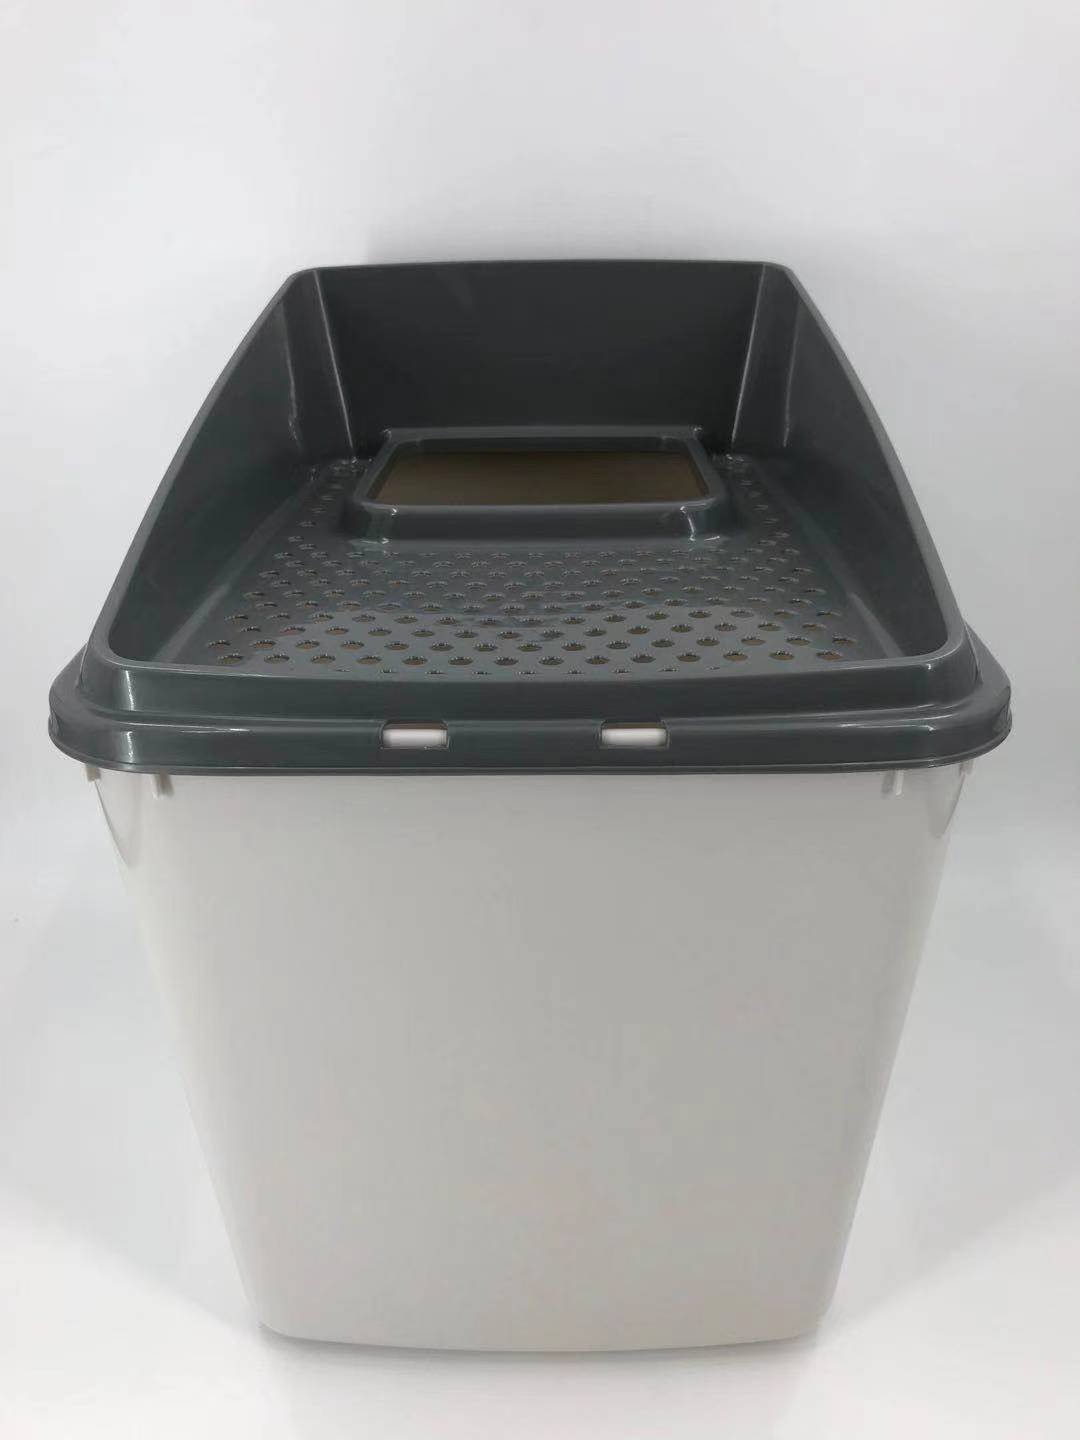 YES4PETS XL Top Entry Cat Litter Box No Mess Large Enclosed Covered Kitty Tray